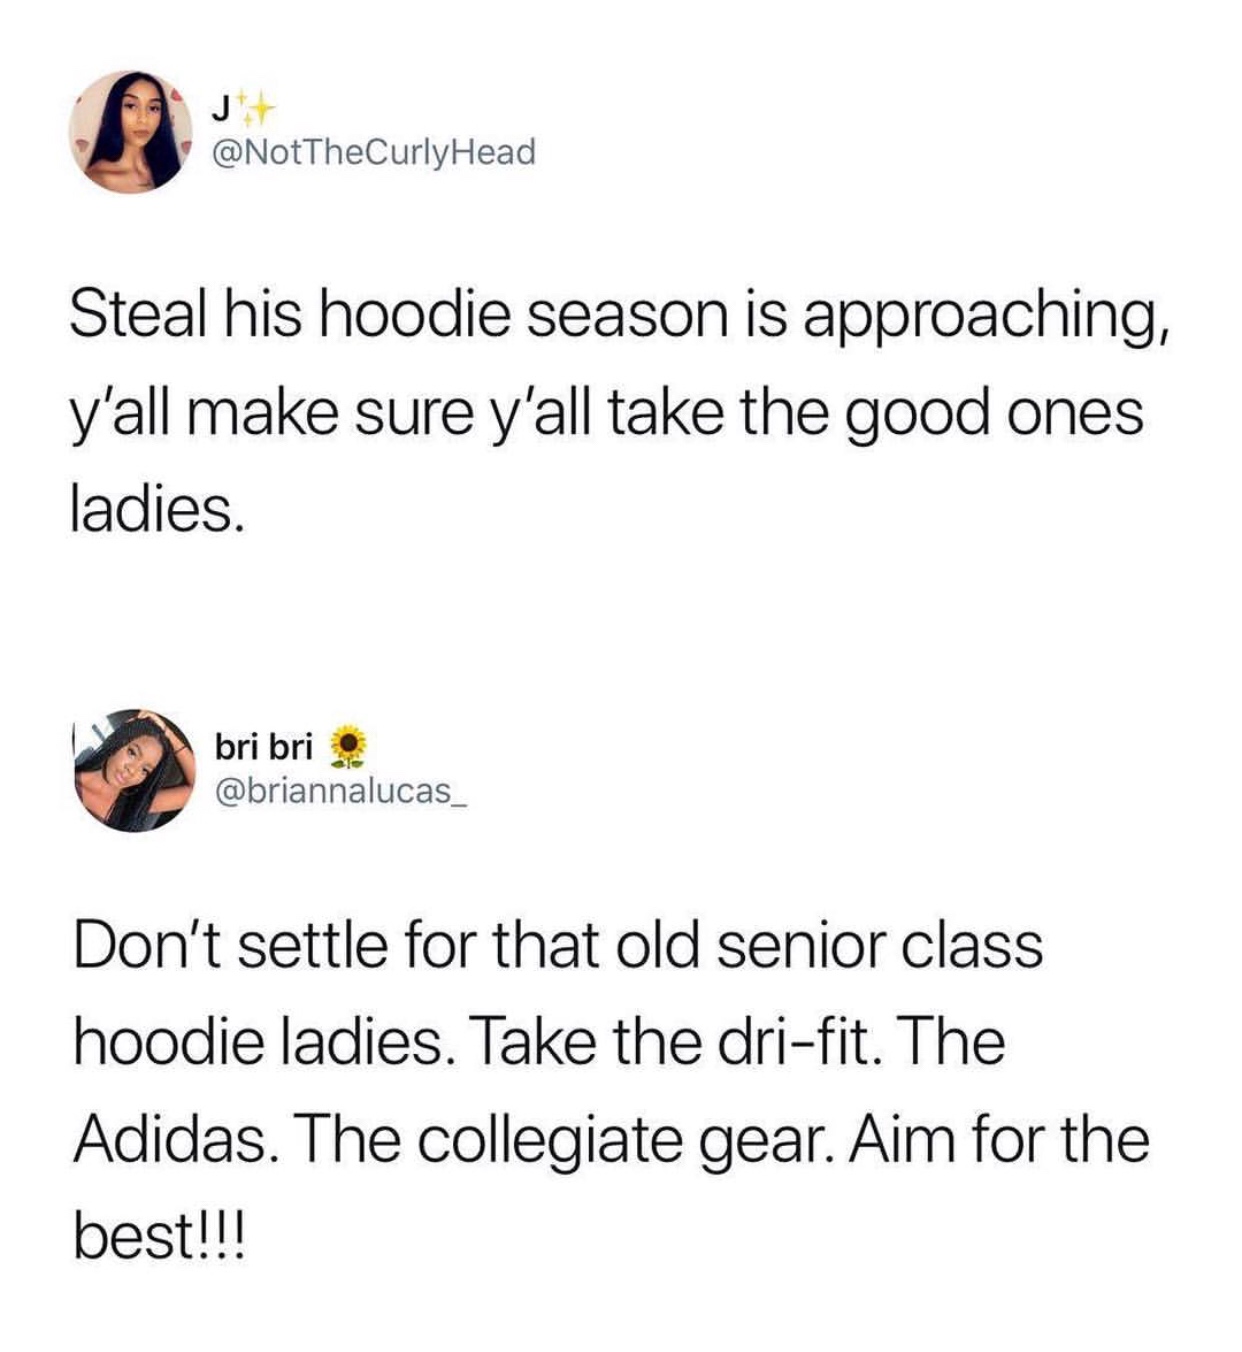 steal his hoodie season - Head Steal his hoodie season is approaching, y'all make sure y'all take the good ones ladies. bri bri Don't settle for that old senior class hoodie ladies. Take the drifit. The Adidas. The collegiate gear. Aim for the best!!!